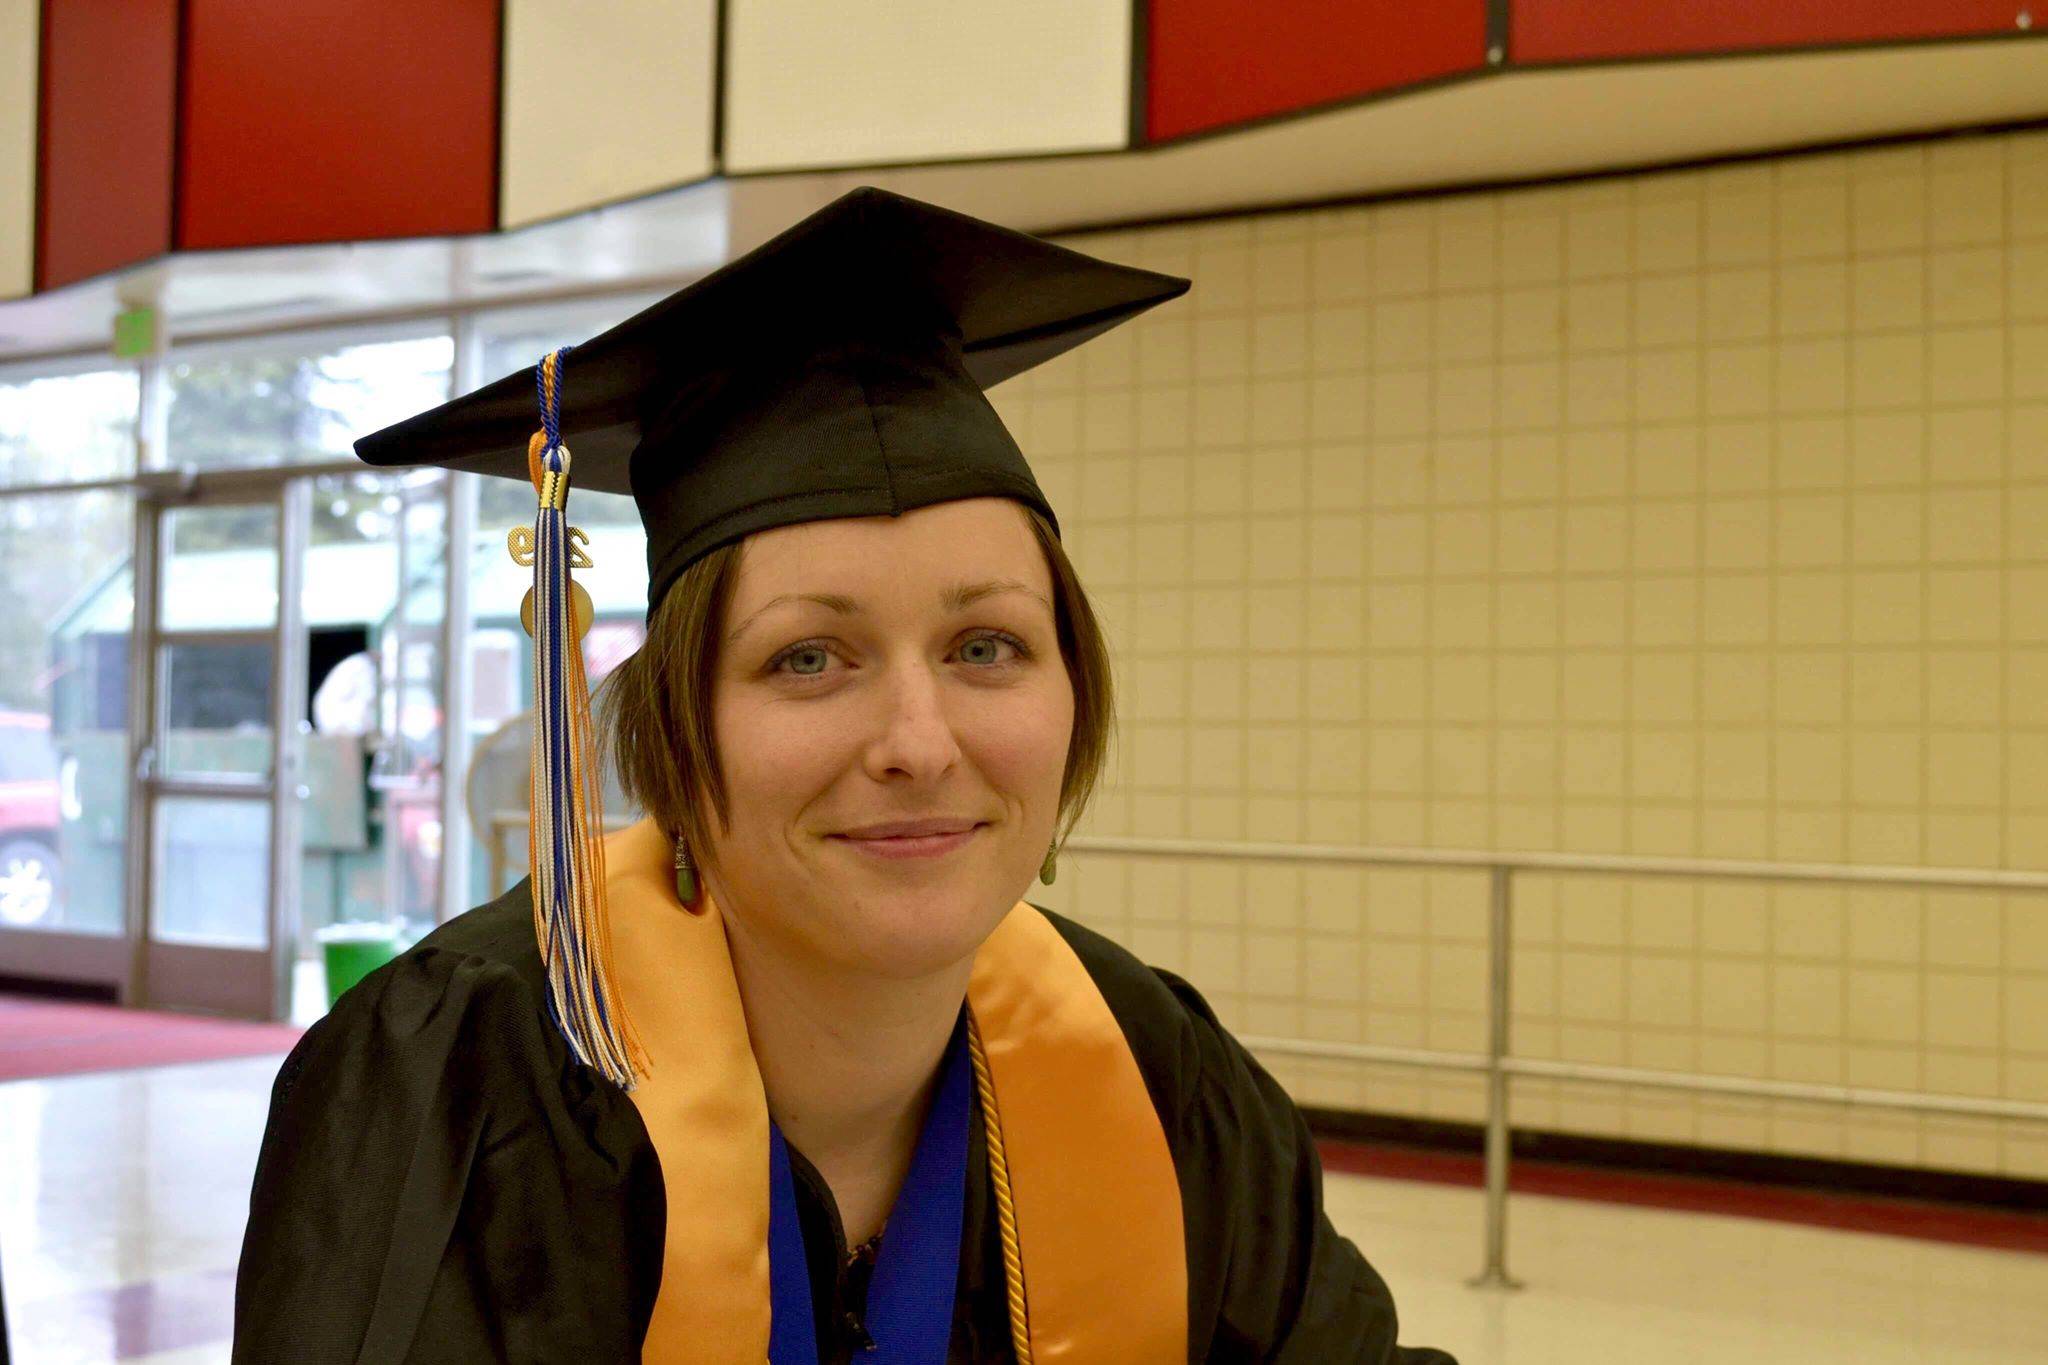 Kenai Peninsula College’s Kenai River Campus graduate and valedictorian Arian Jasmin gets ready to walk the stage and receive her associate’s of arts degree on Thursday, May 9, 2019, at Kenai Central High School in Kenai, Alaska. (Photo by Victoria Petersen/Peninsula Clarion)